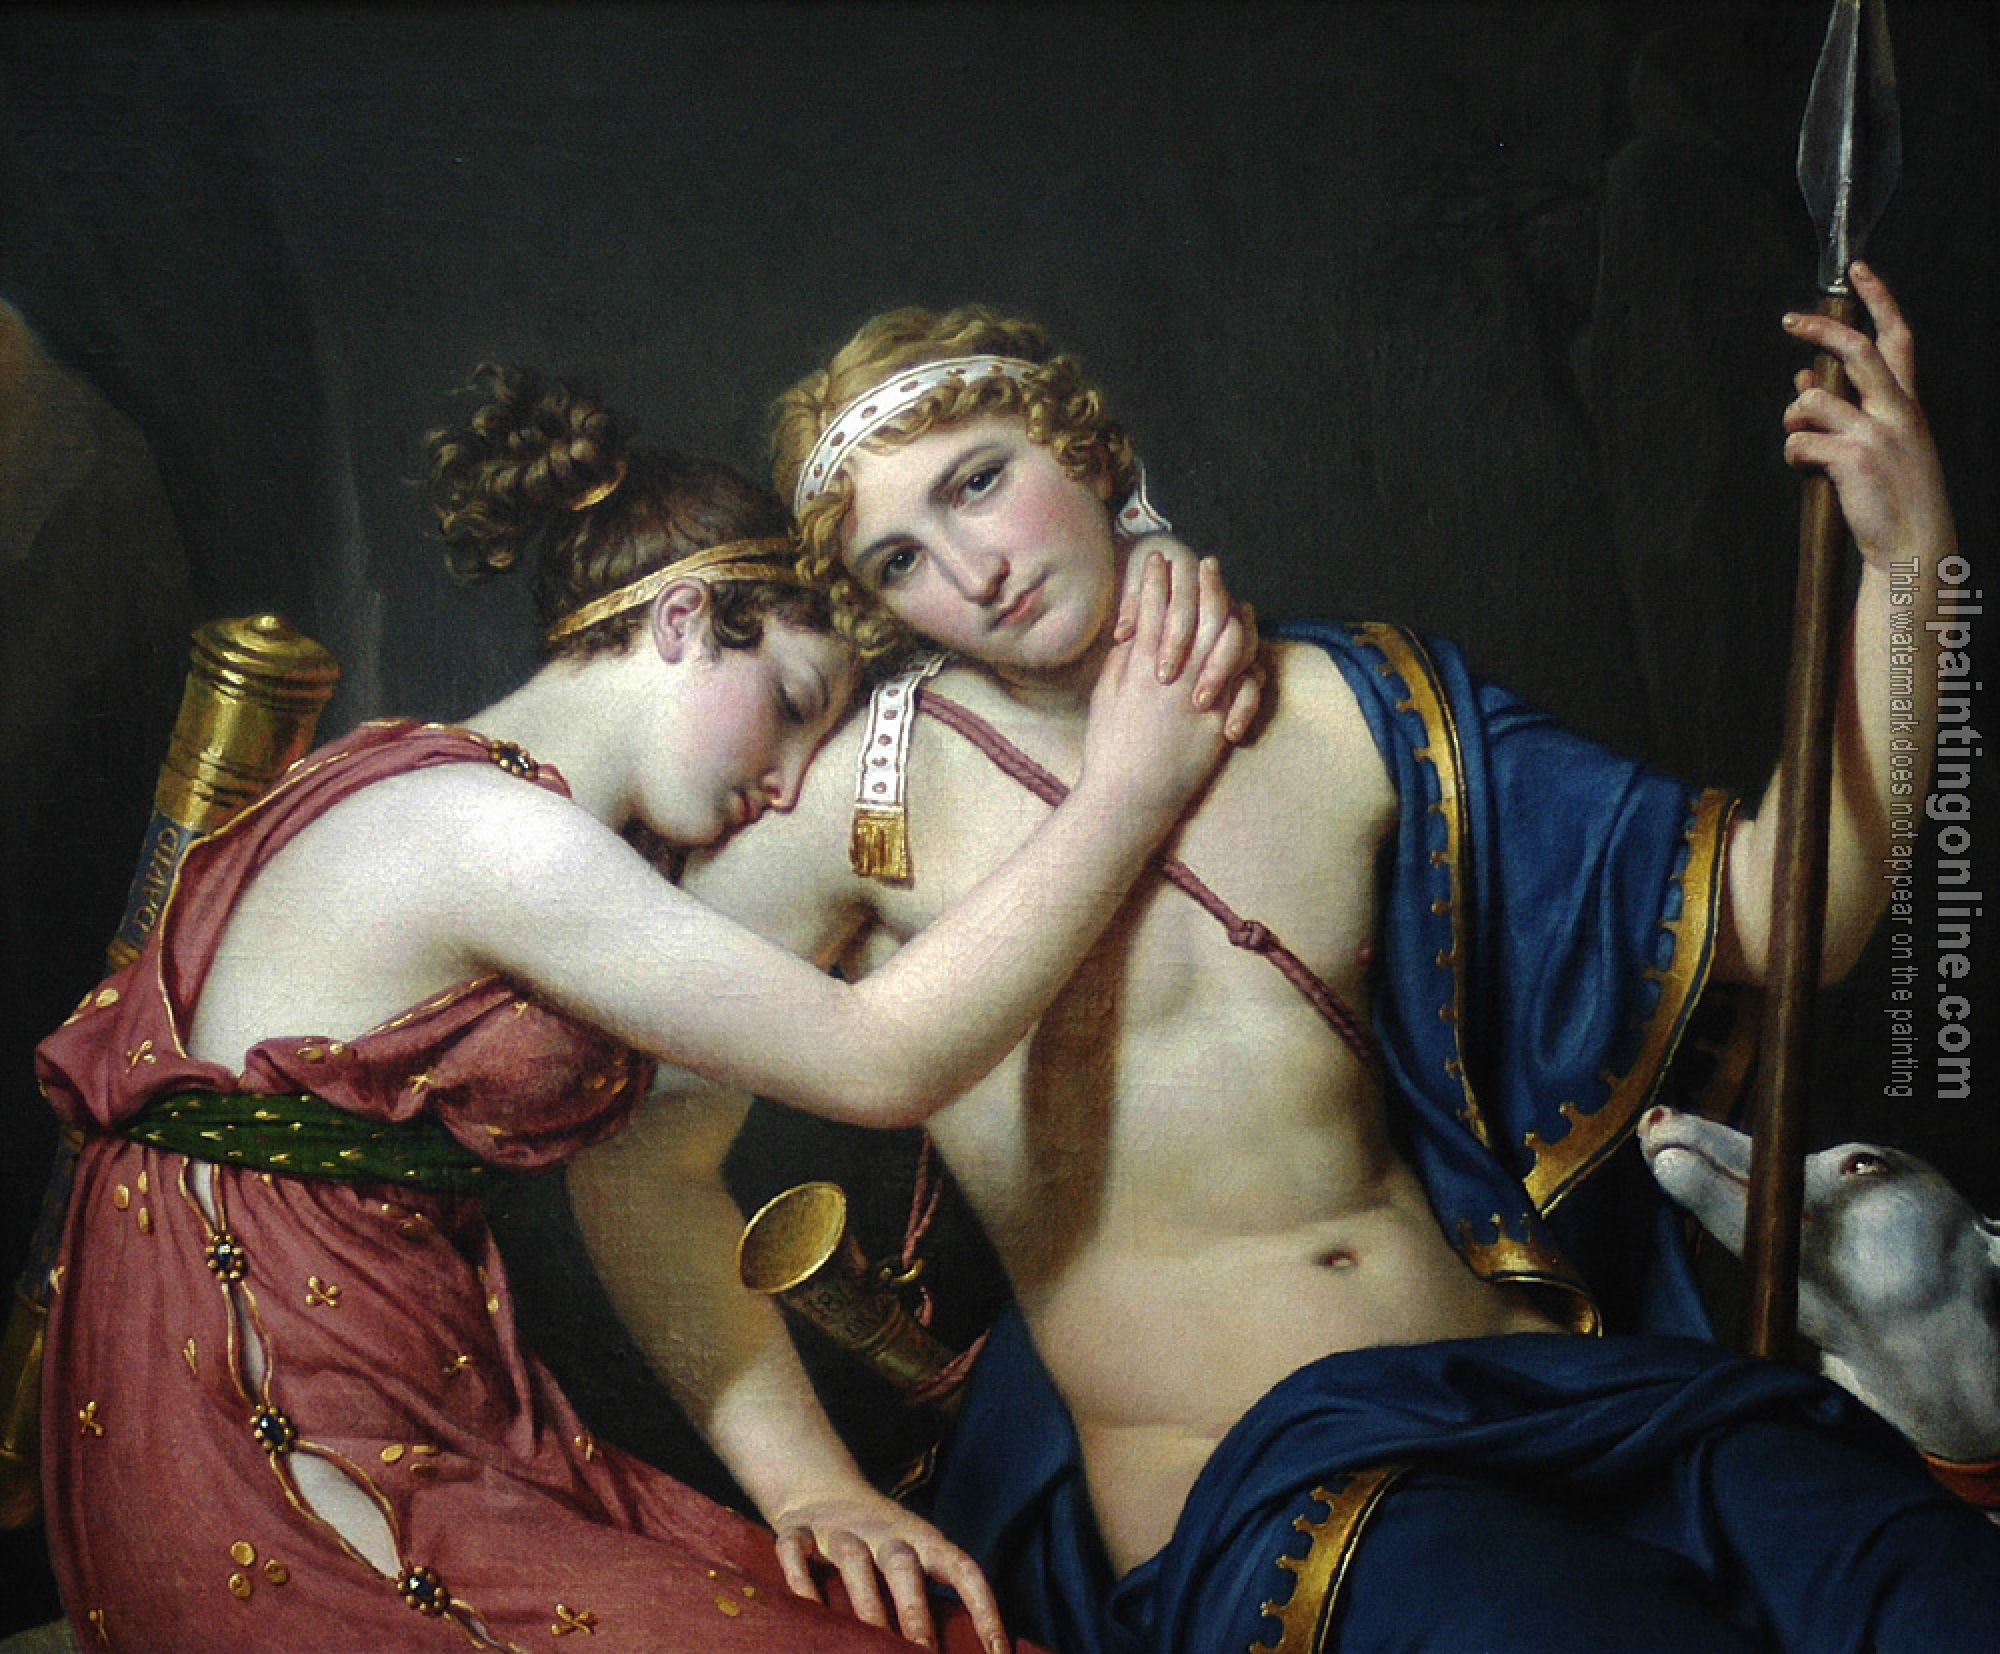 David, Jacques-Louis - The Farewell of Telemachus and Eucharis